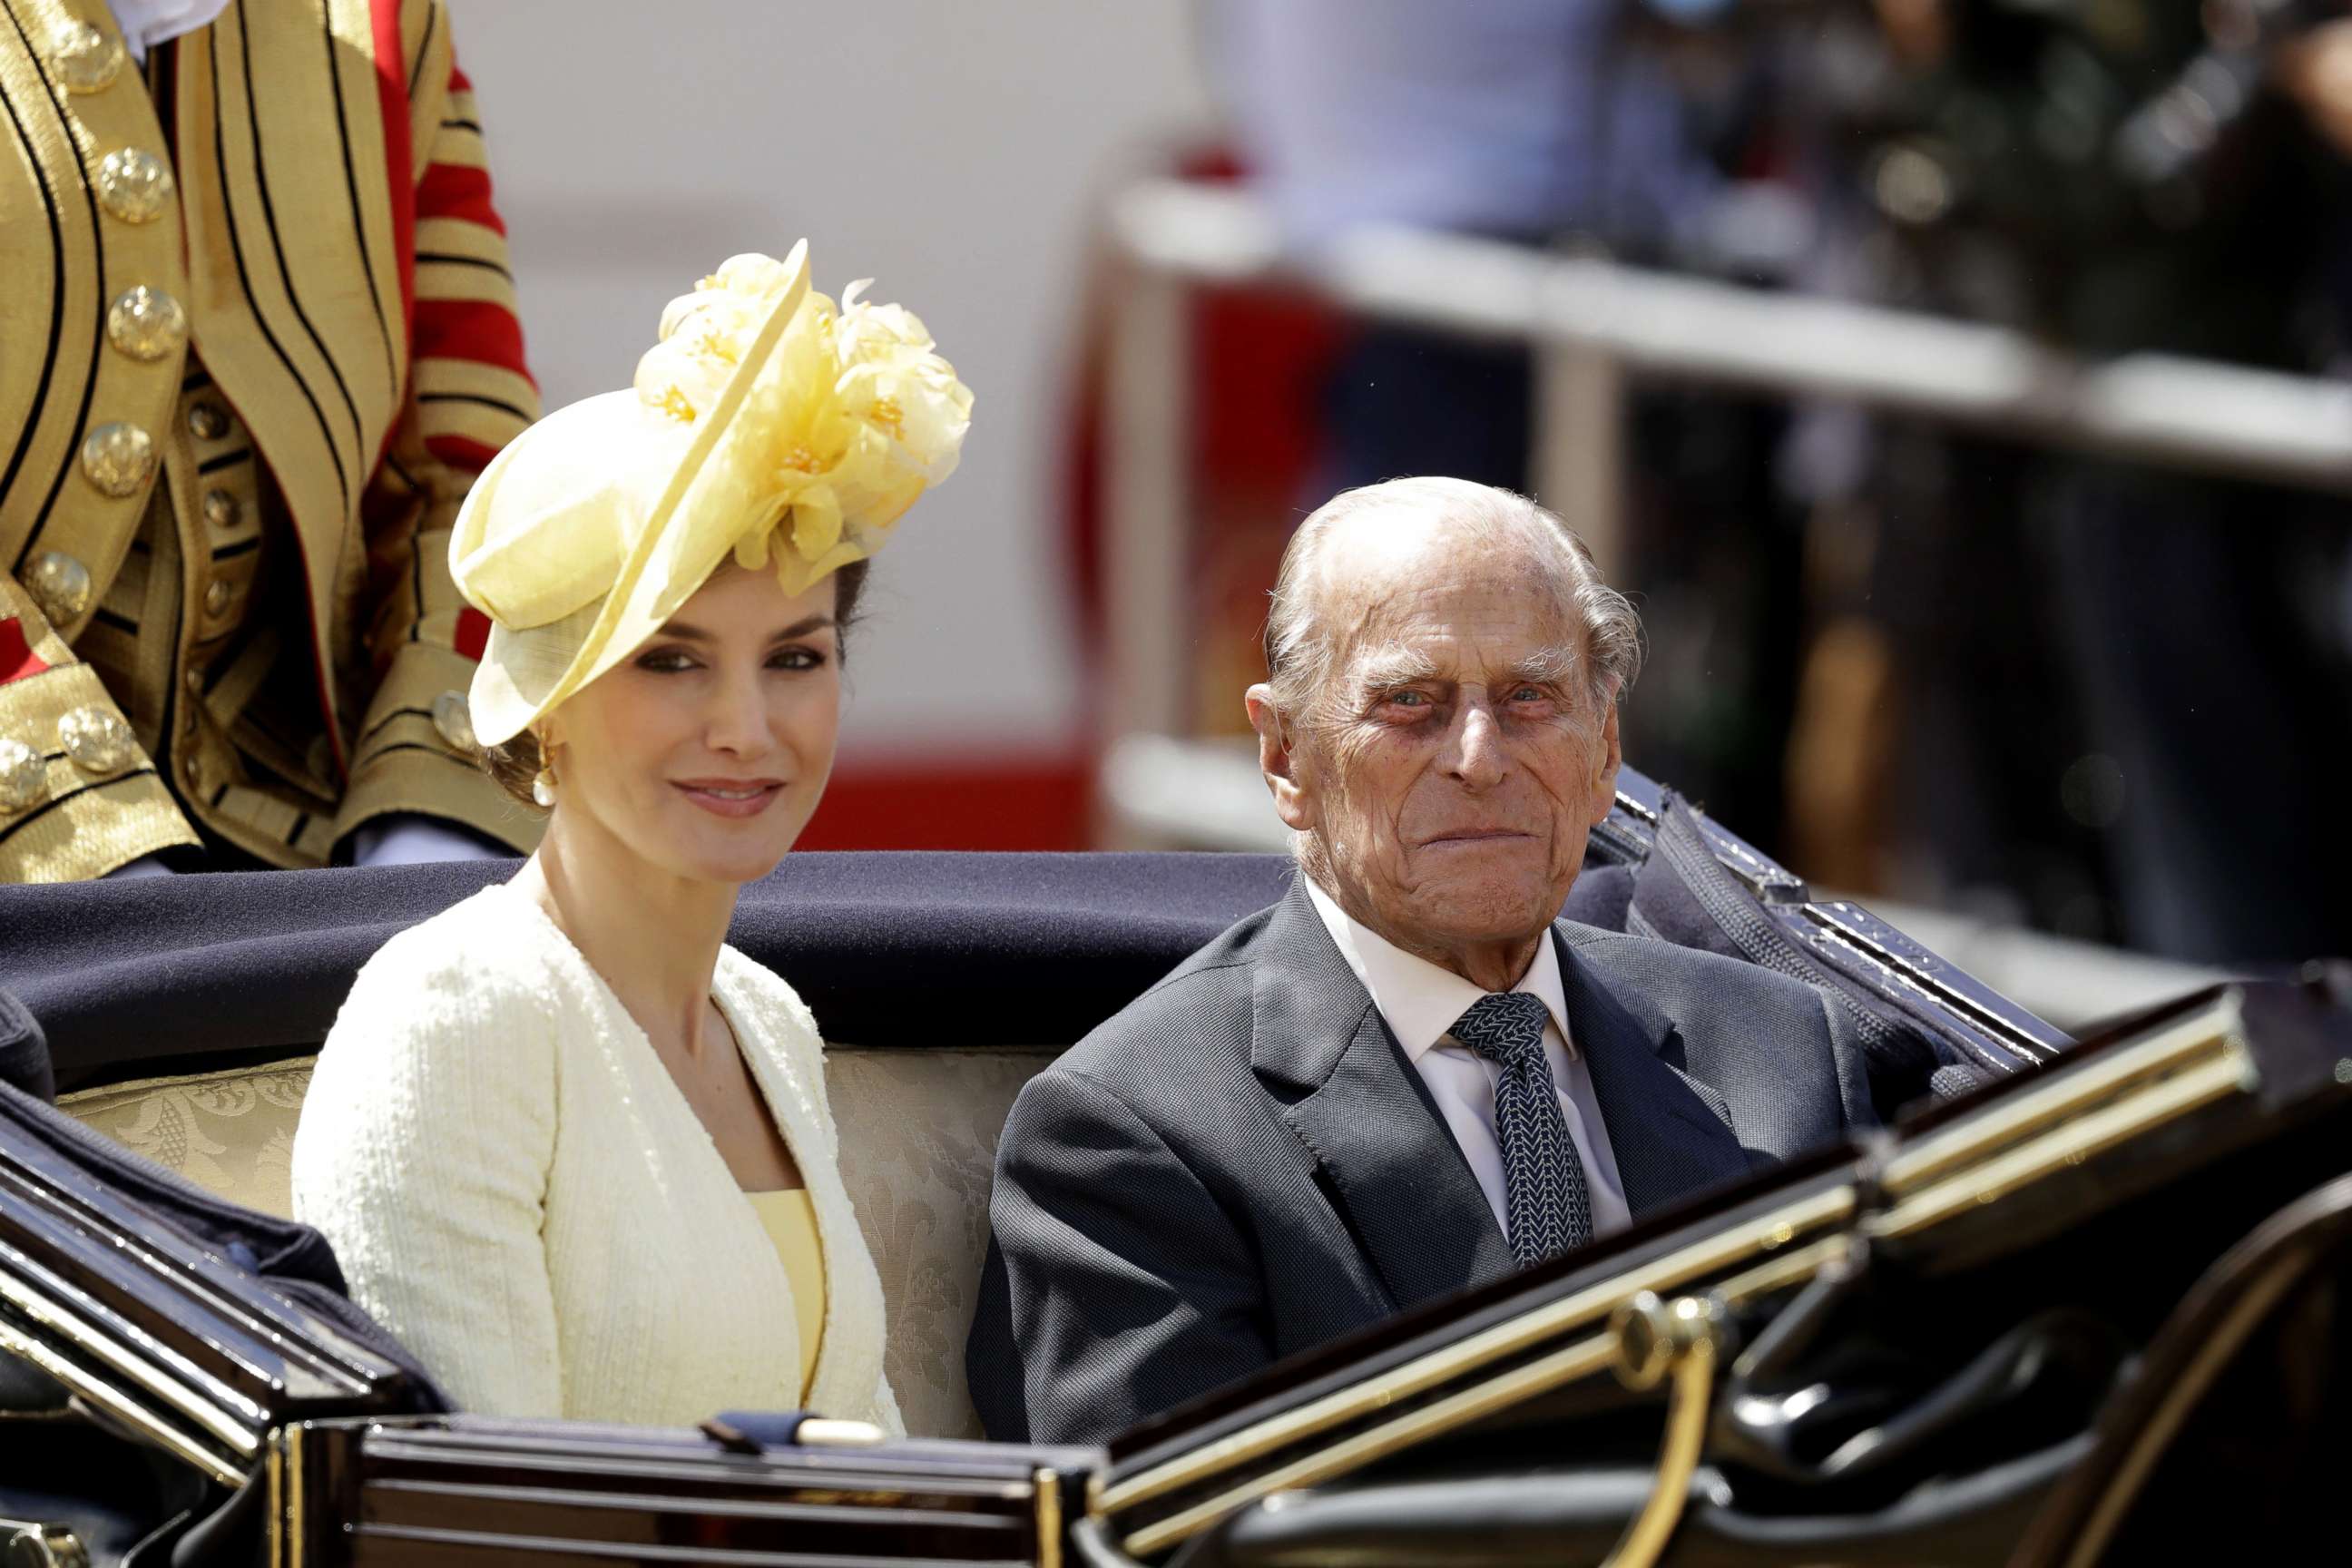 PHOTO: Spanish Queen Letizia and Britain's Prince Philip, Duke of Edinburgh sit together in a carriage as they are taken to Buckingham Palace, July 12, 2017, in London.